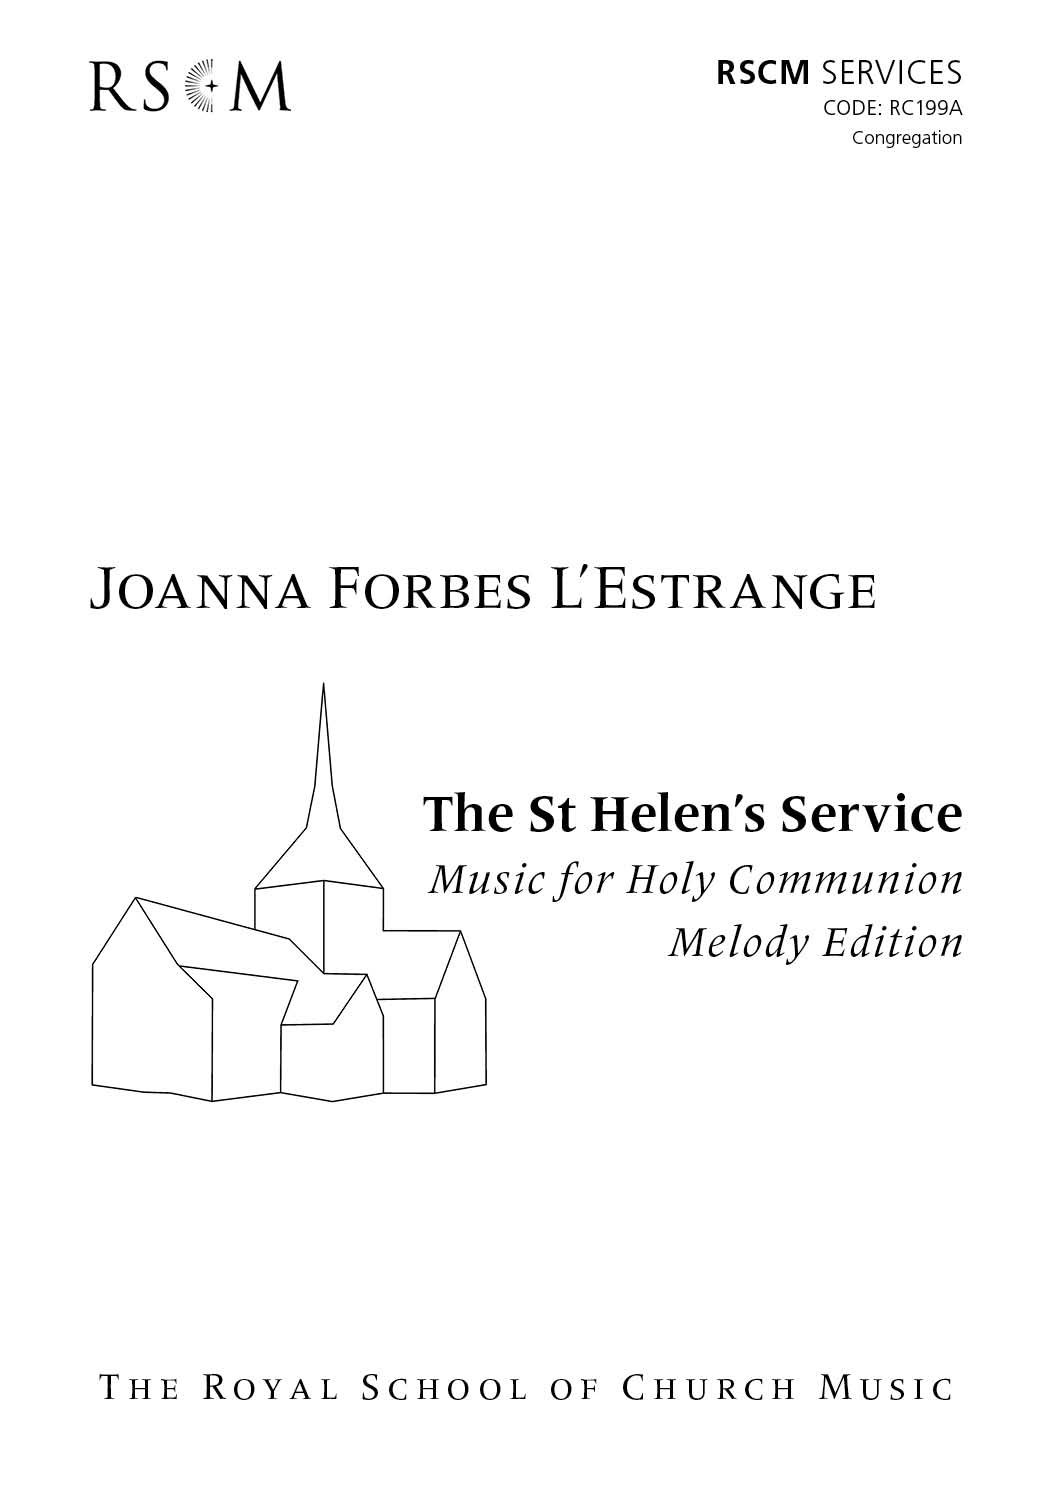 St Helen's Service (Melody) COVER.jpg